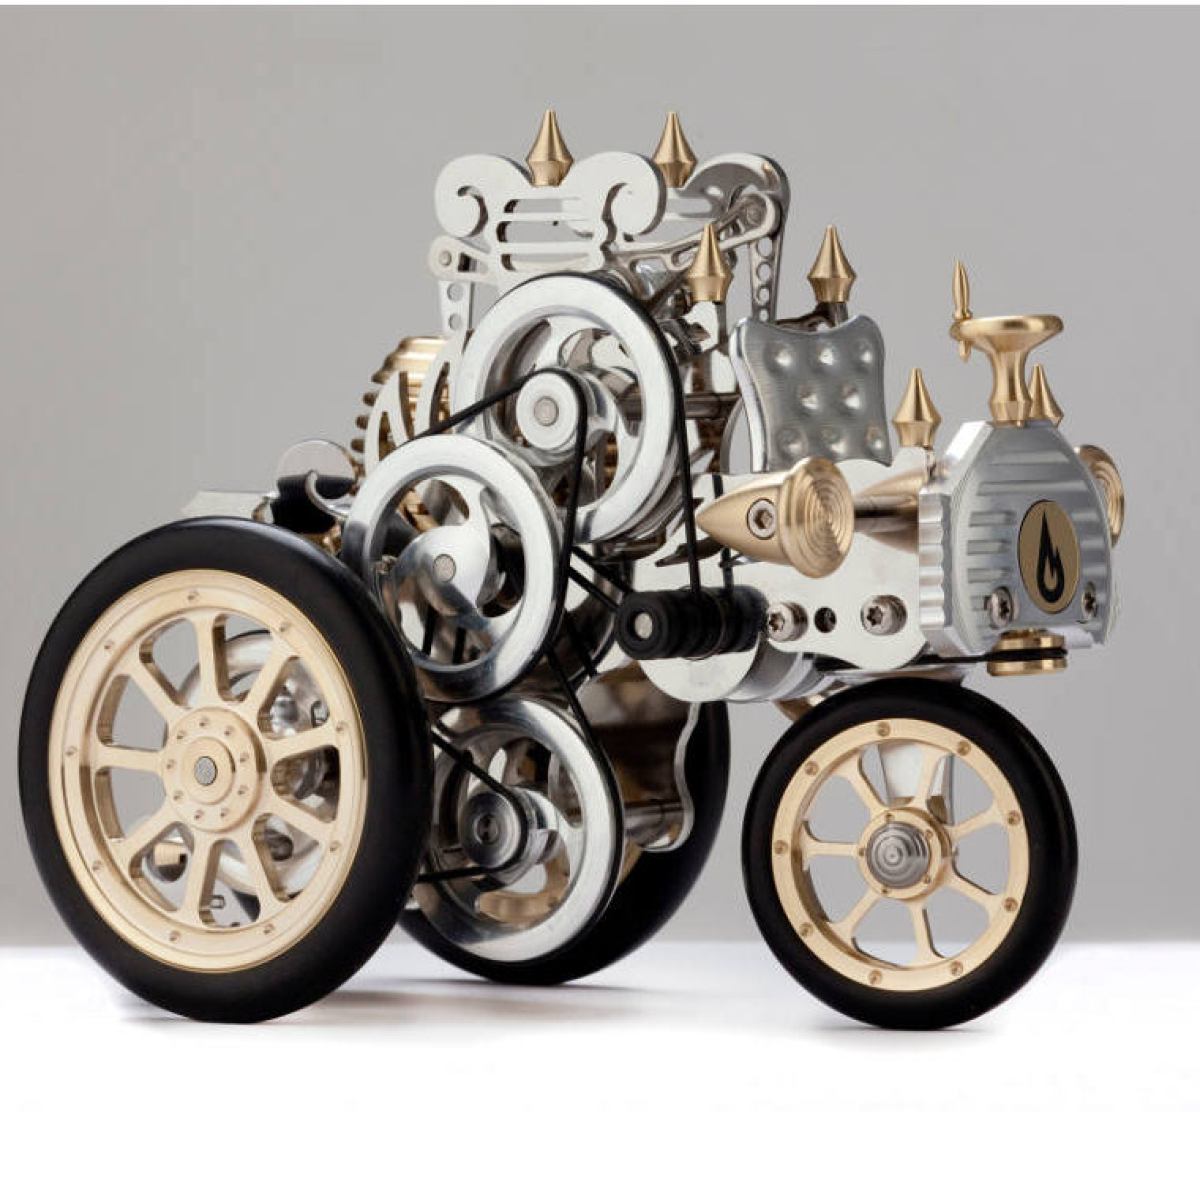 Model car with Stirling engine, inspired by Carl Benz